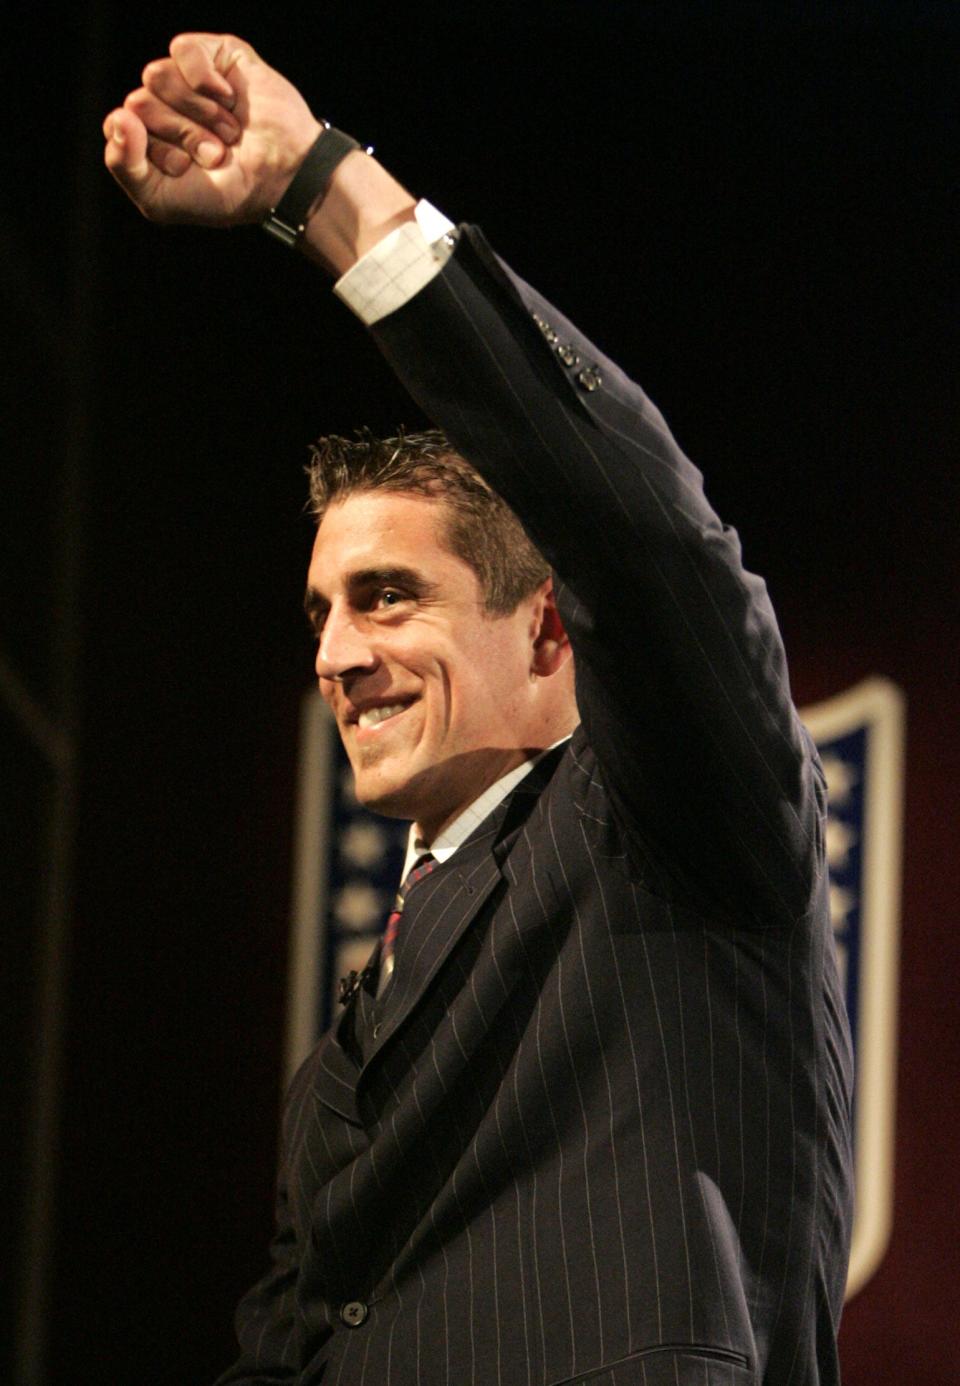 Aaron Rodgers reacts after being selected by the Packers as the 24th overall pick the 2005 NFL draft.